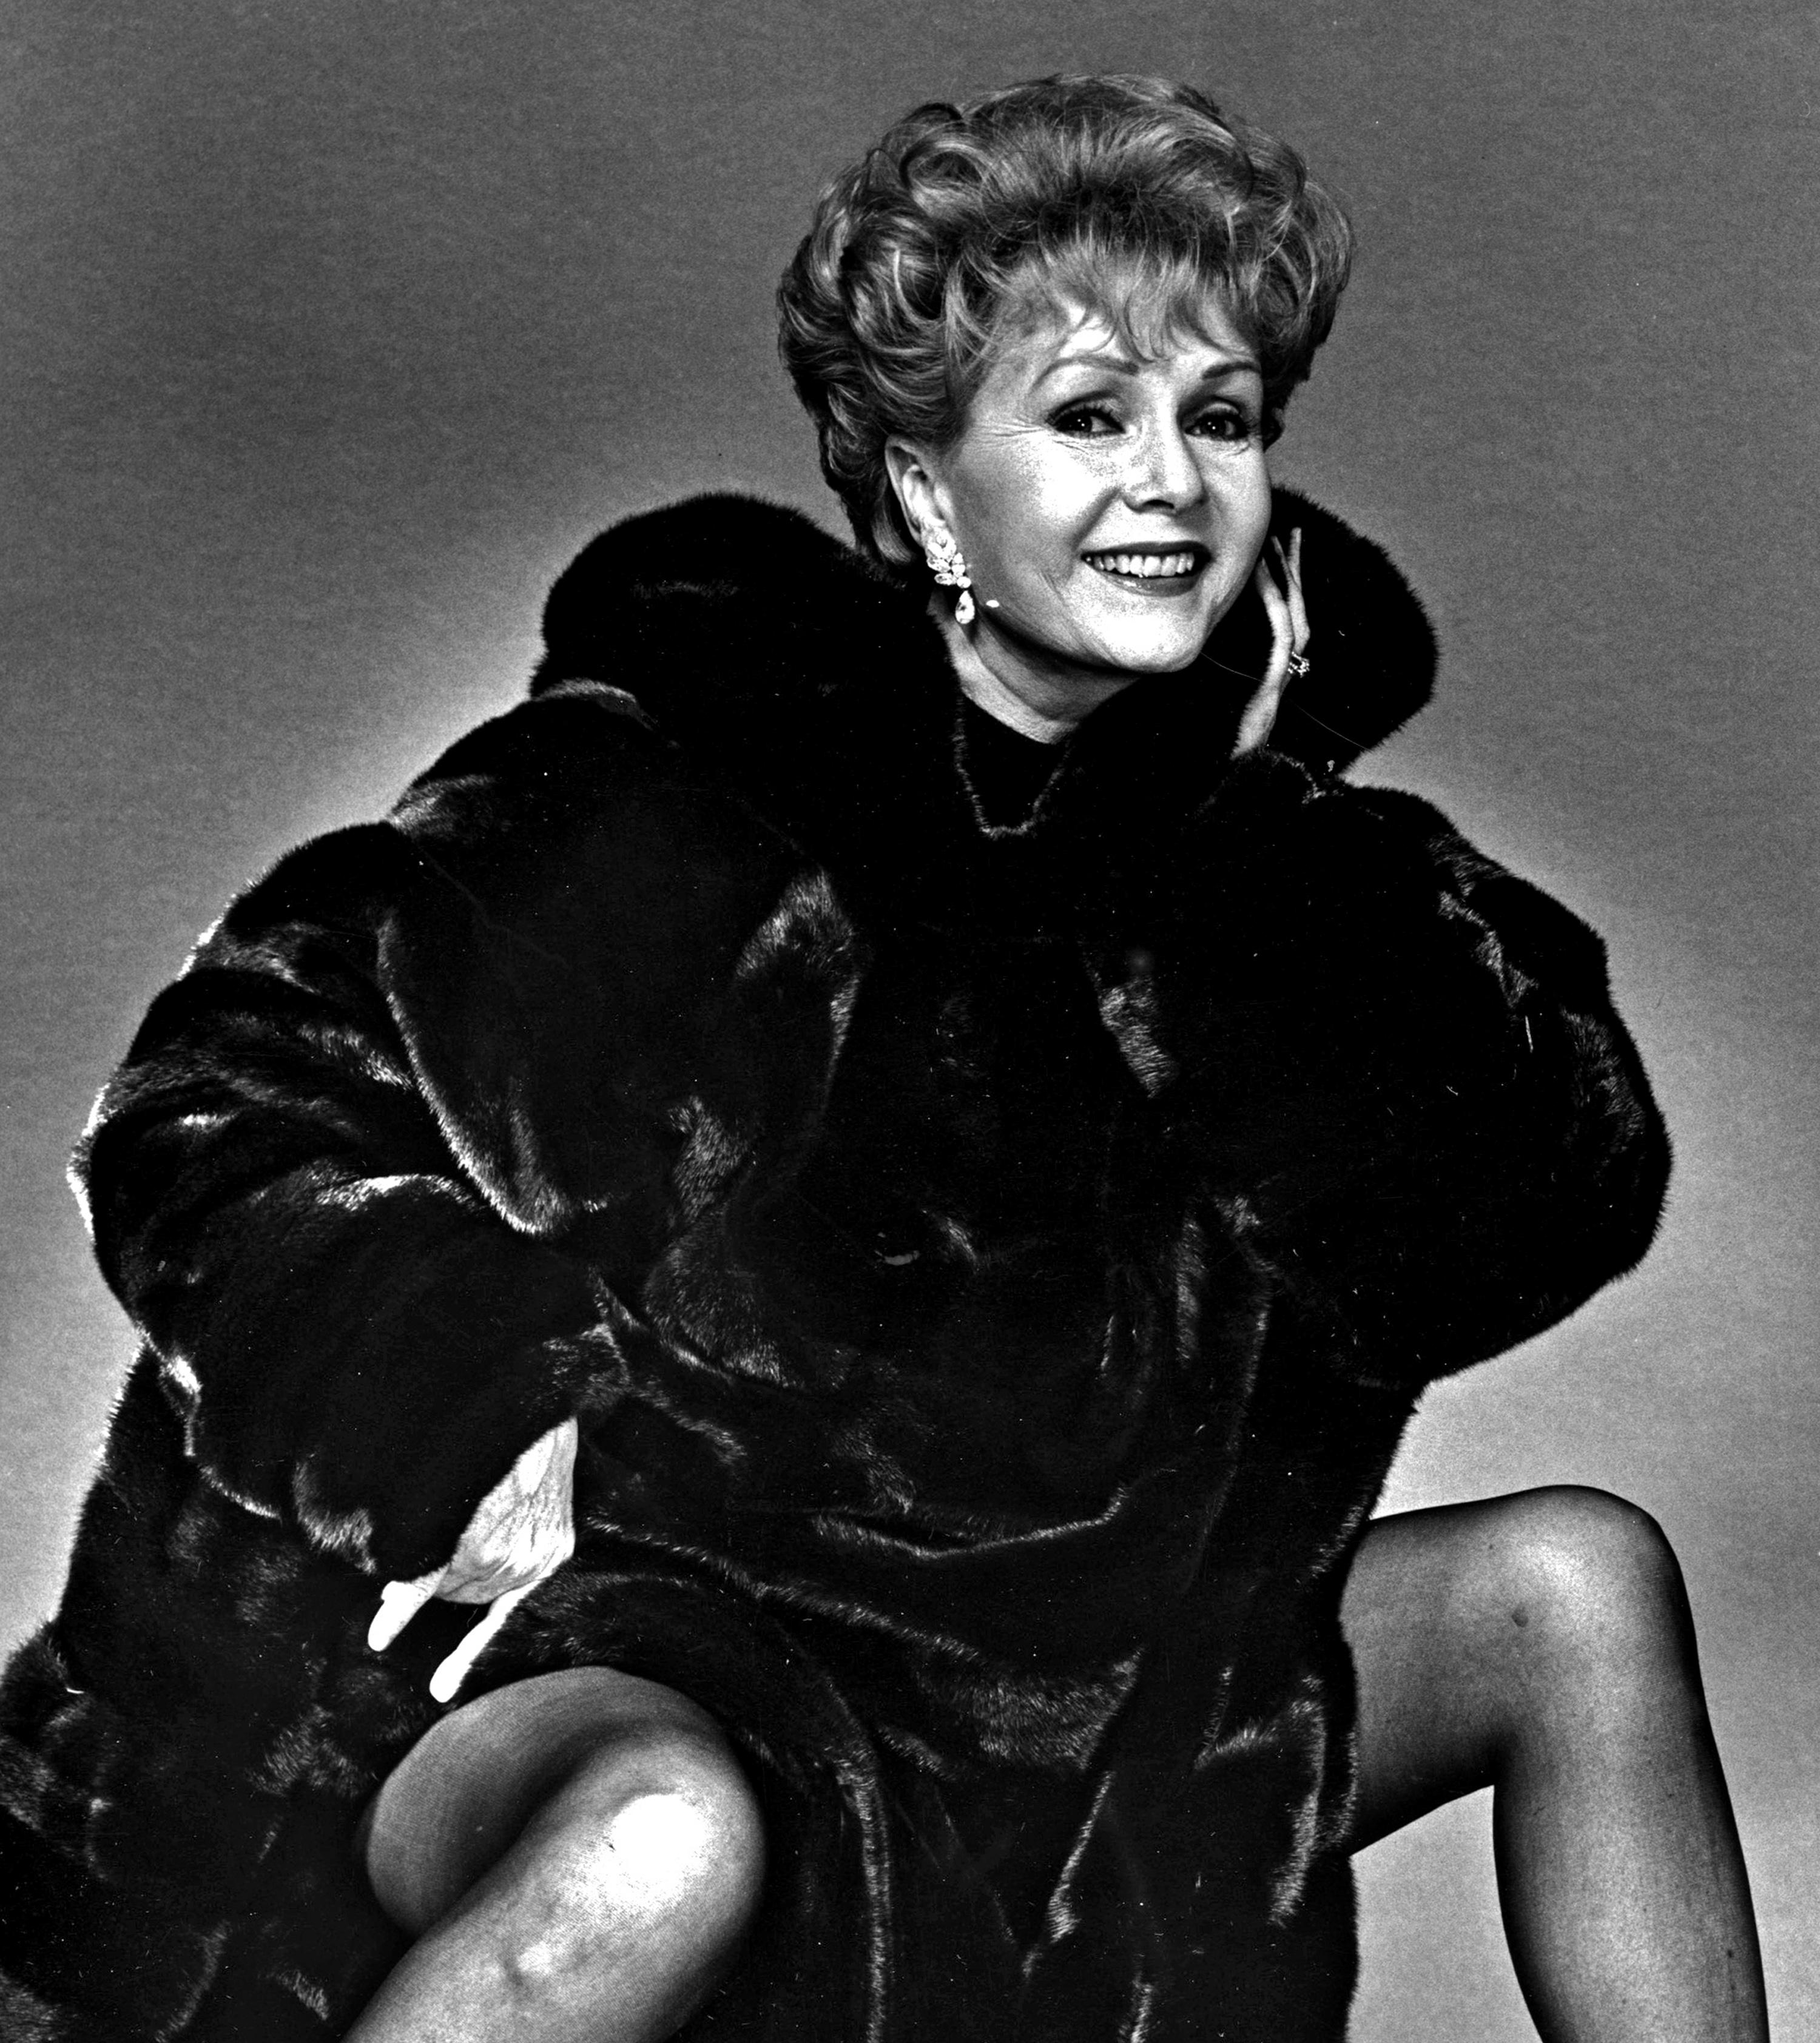 Actress Debbie Reynolds 'What Becomes A Legend Most?' Blackglama session photo - Photograph by Jack Mitchell